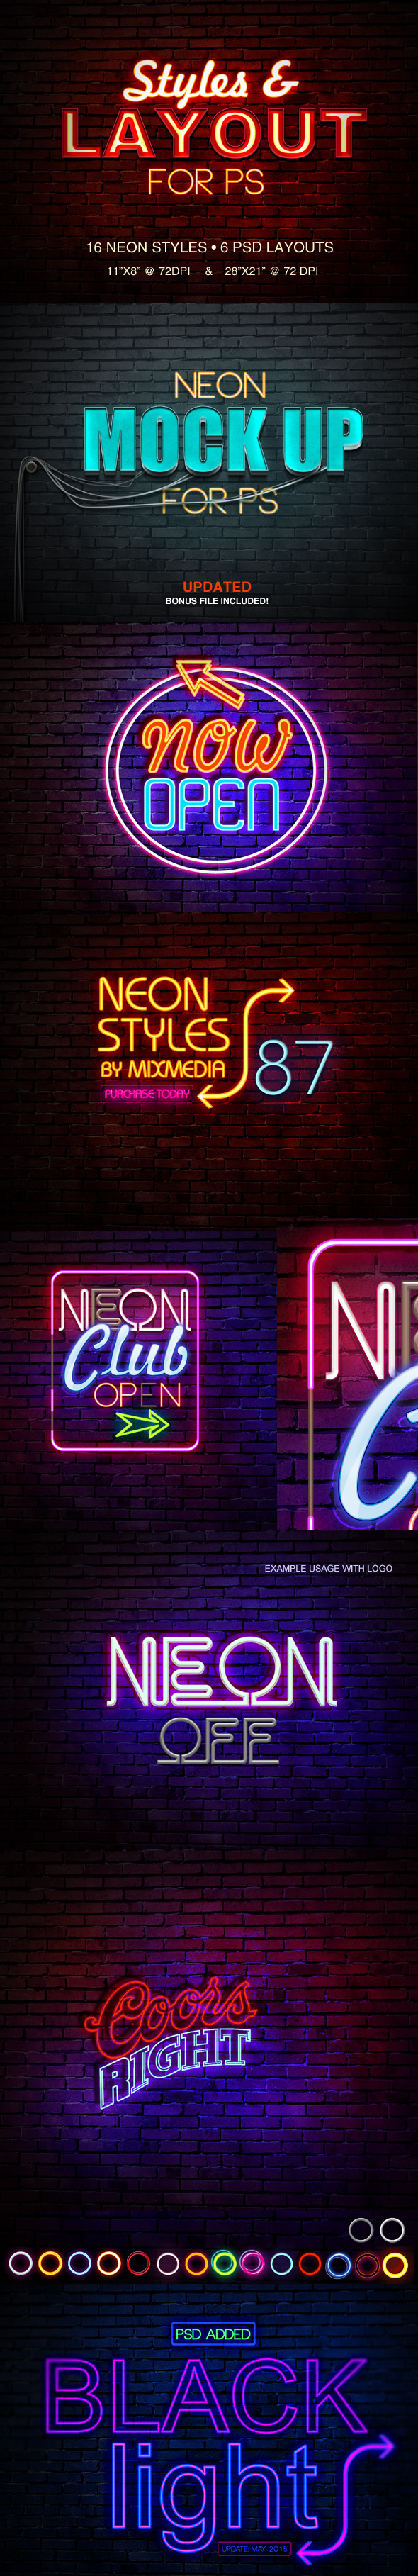 [Image: neon%20preview.jpg]